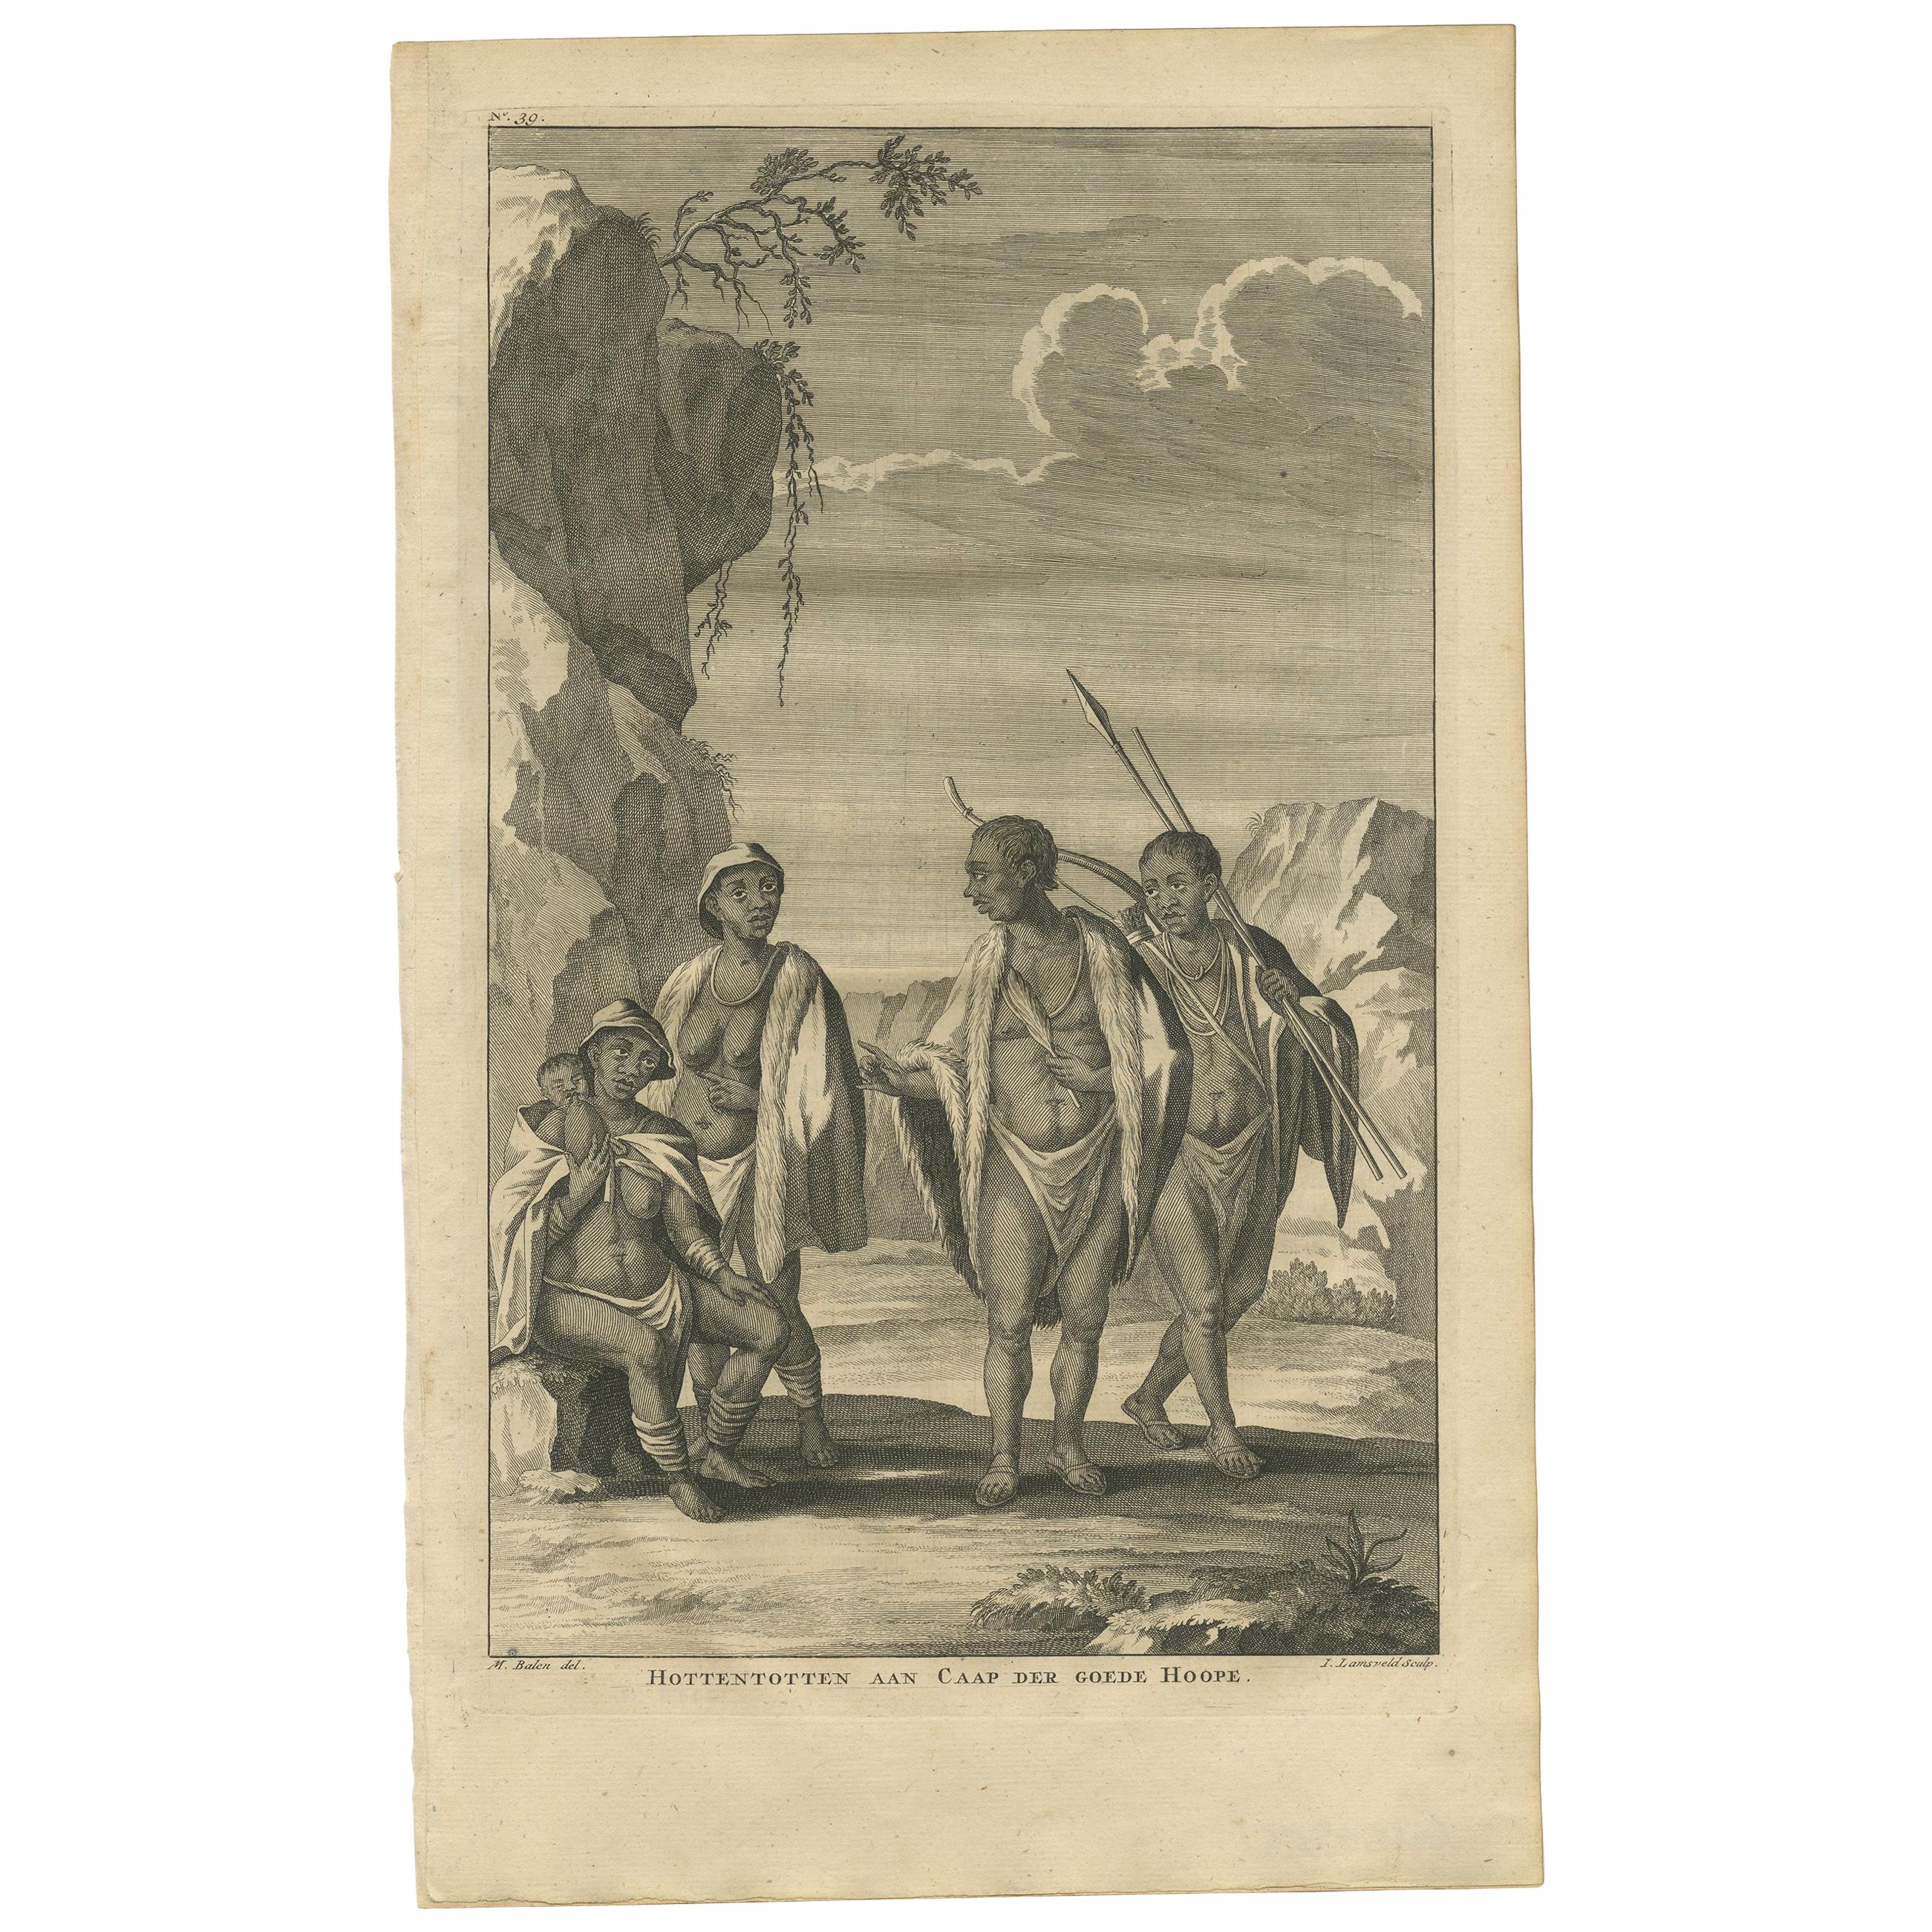 Antique Print of the Khoikhoi of Cape of Good Hope by Valentijn, 1726